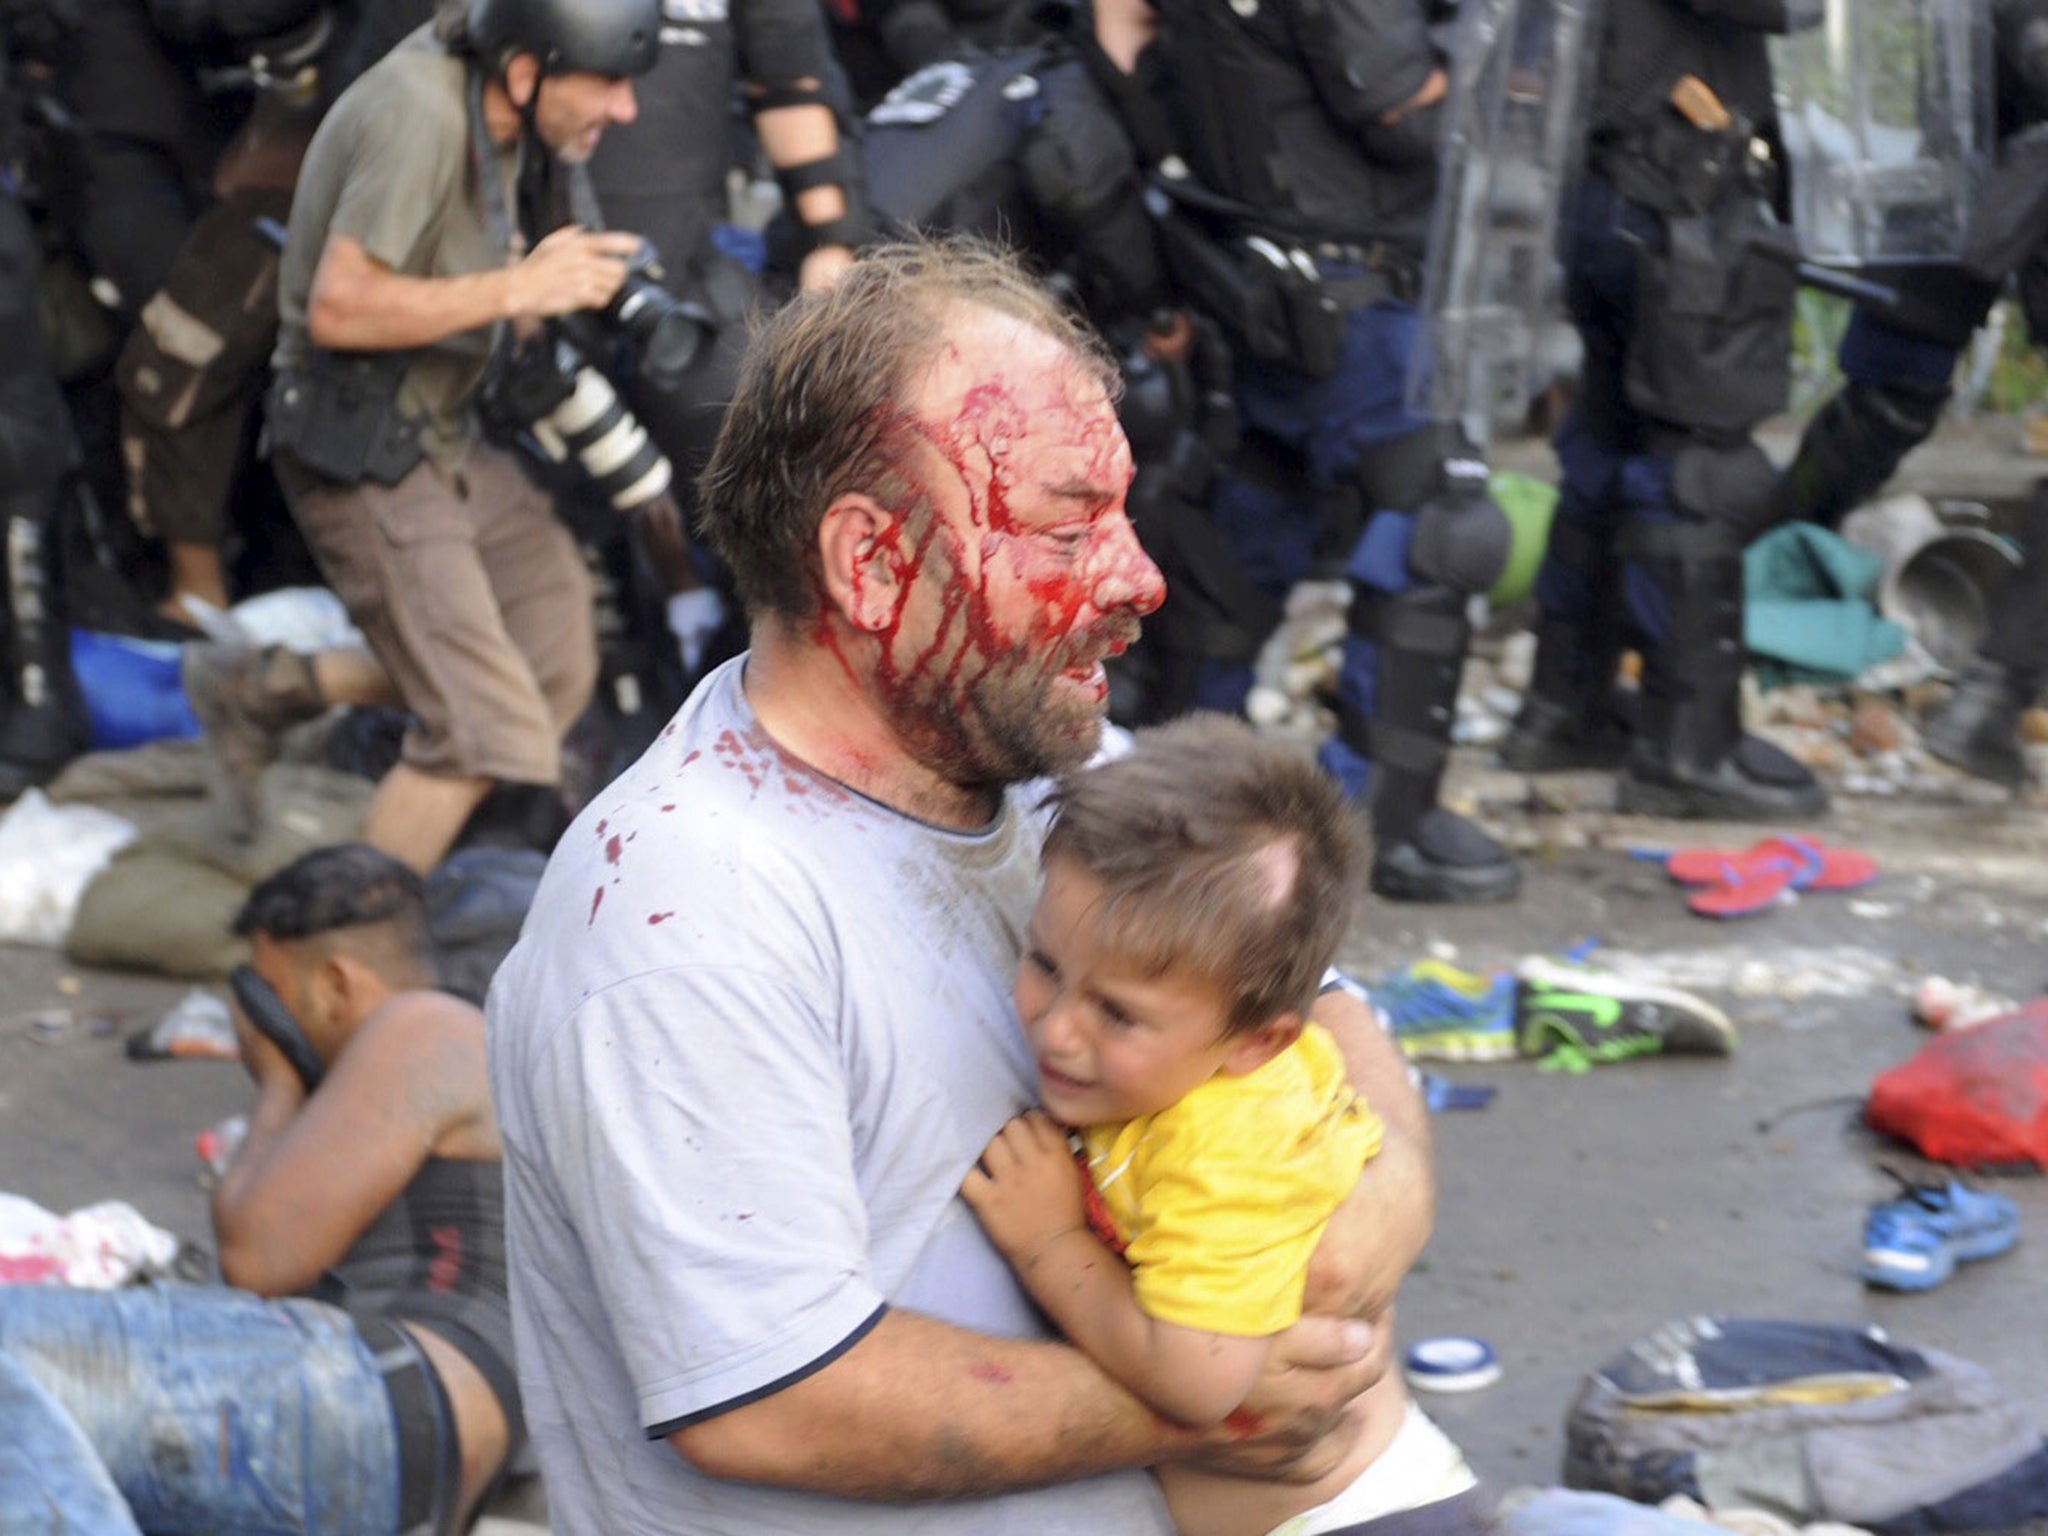 Refugees in Hungary clashed with police after the border with Serbia was closed